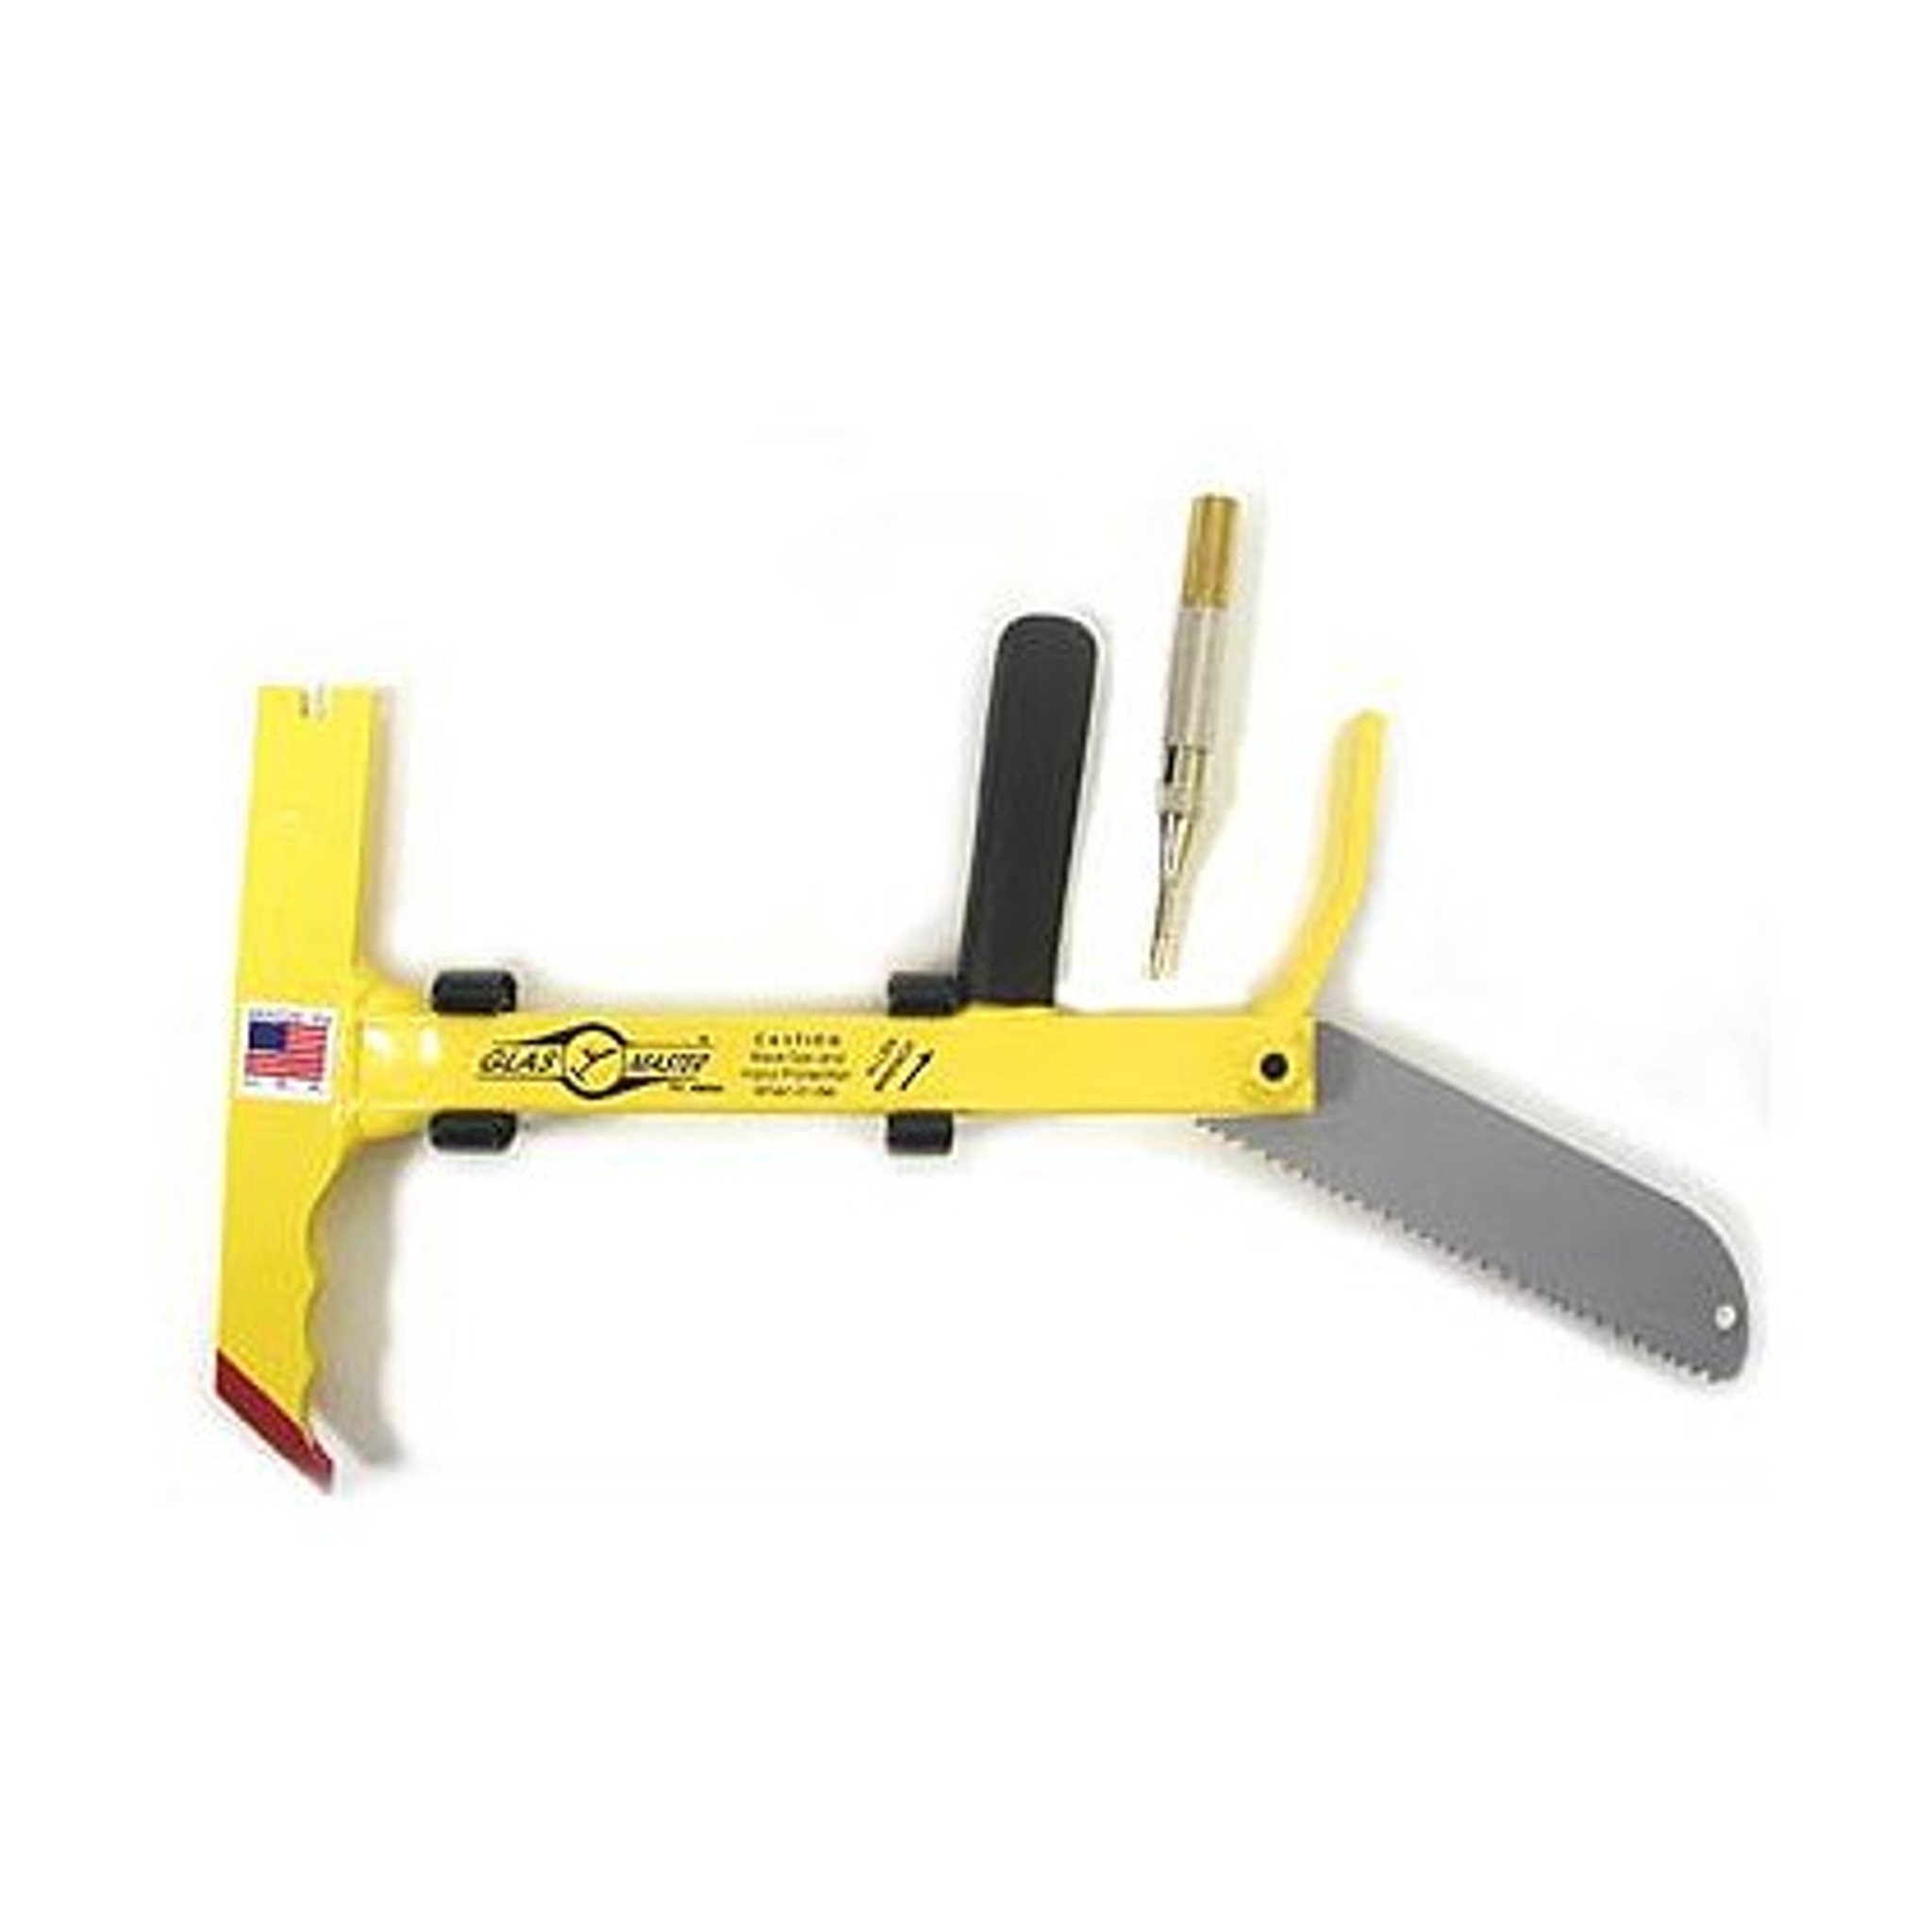 Glas-Master Rescue Hand Tool